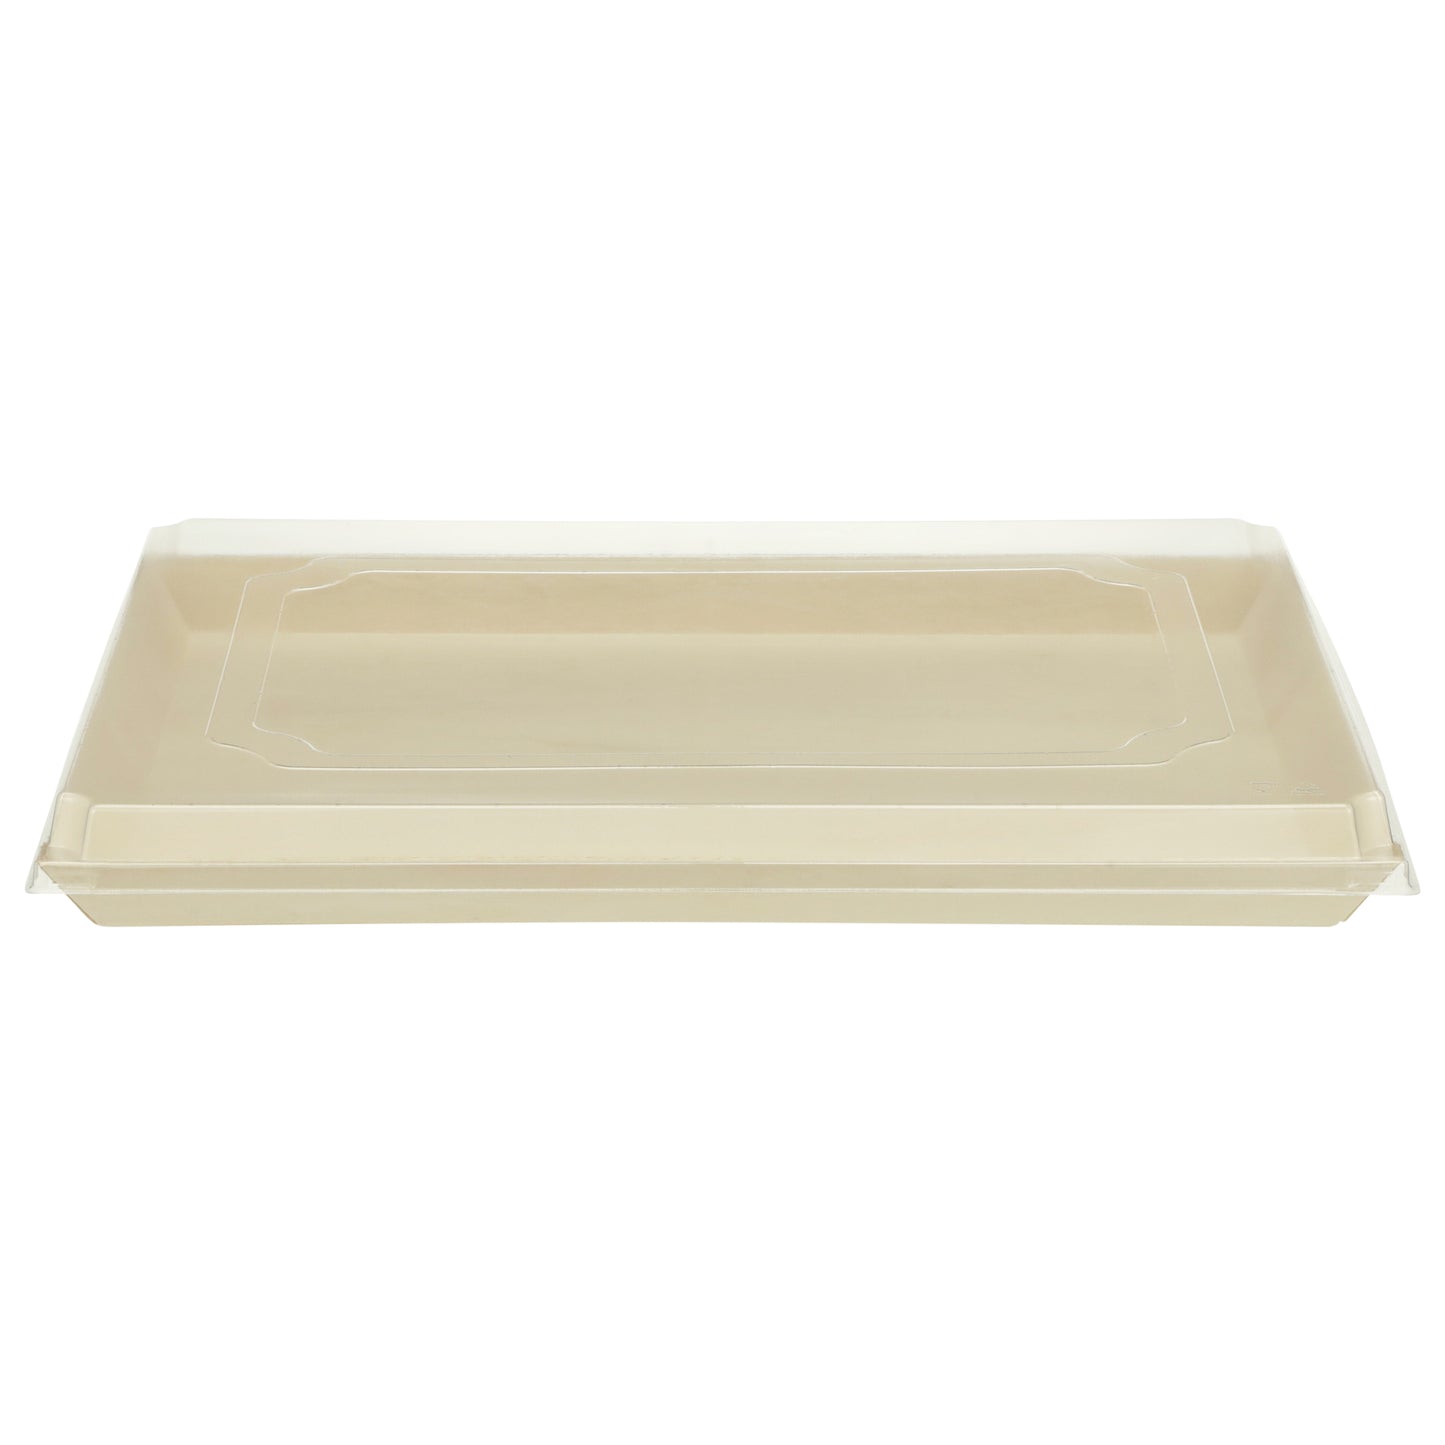 11.8" X 15" X 1" Covered Tray Set | Compostable Balsa Tray with RPET Lid